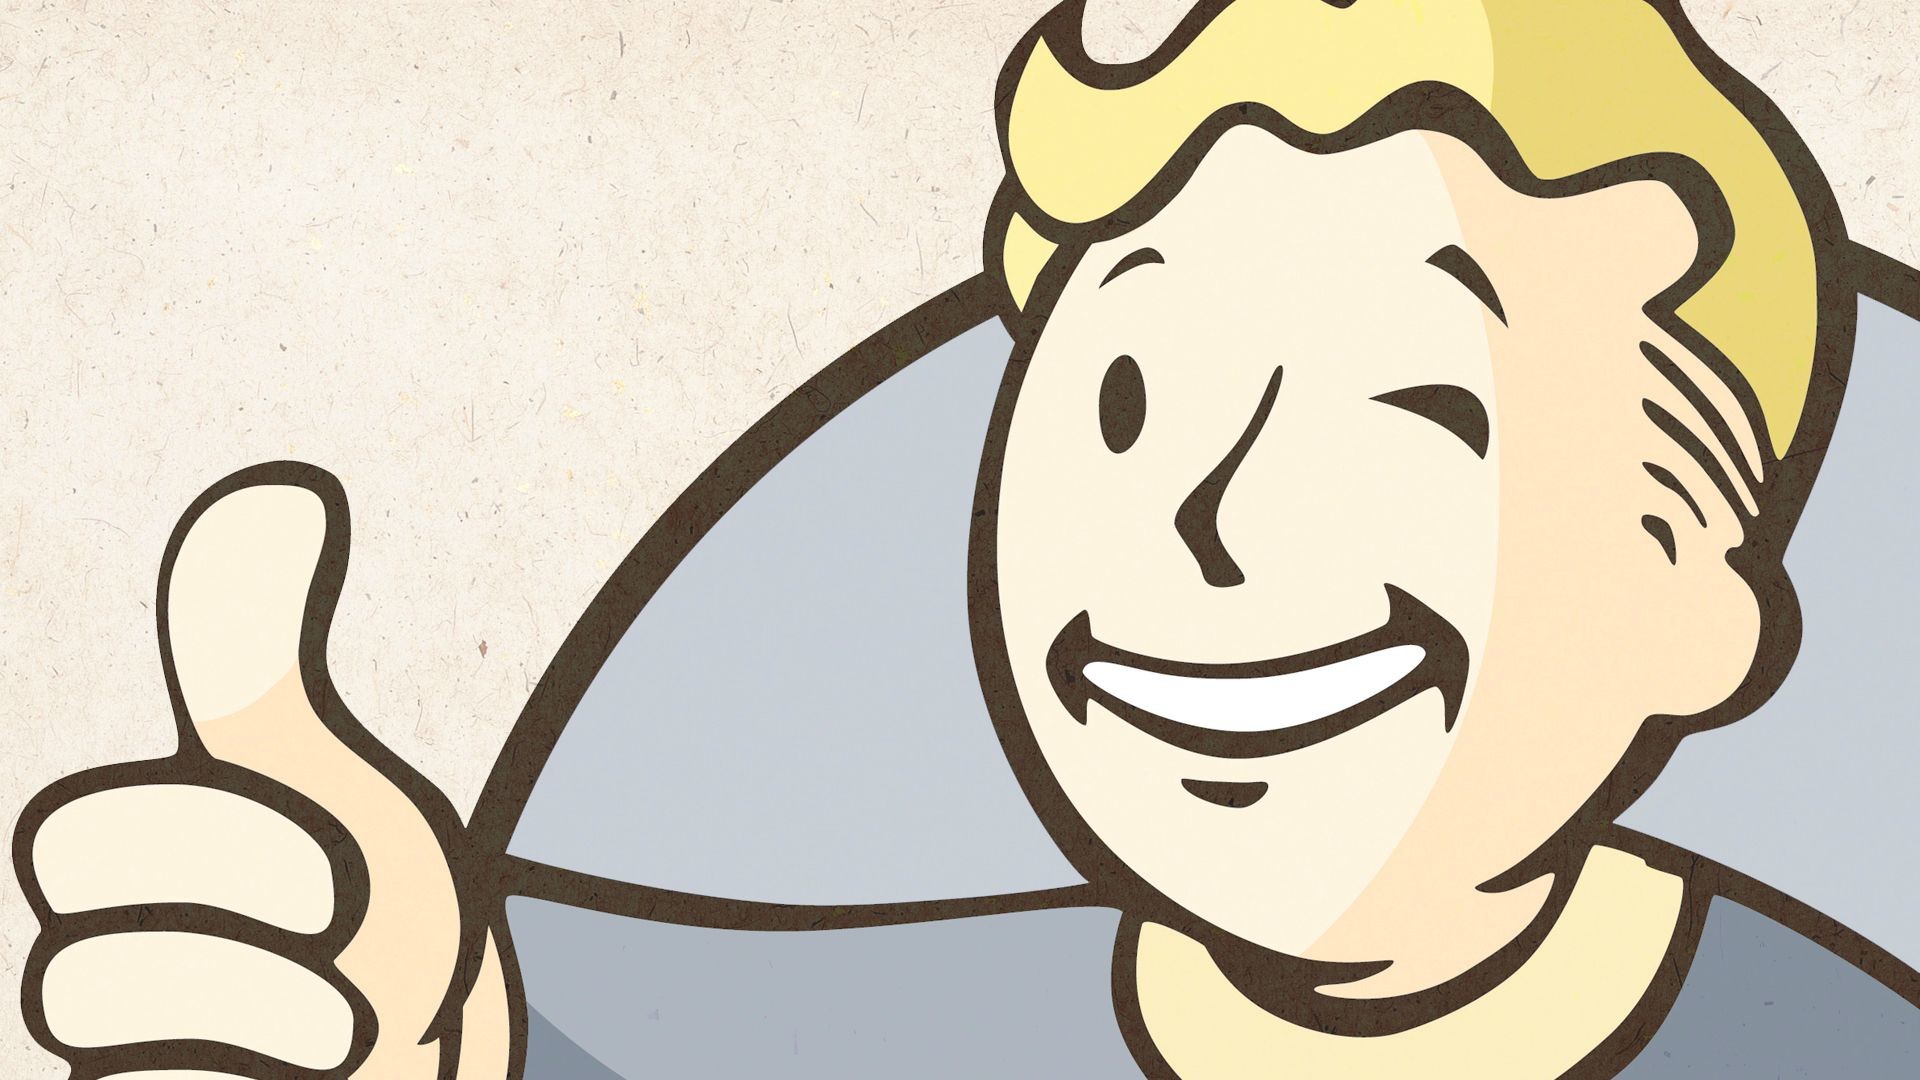 Fallout 4 – Welcome Home wallpaper (no text)